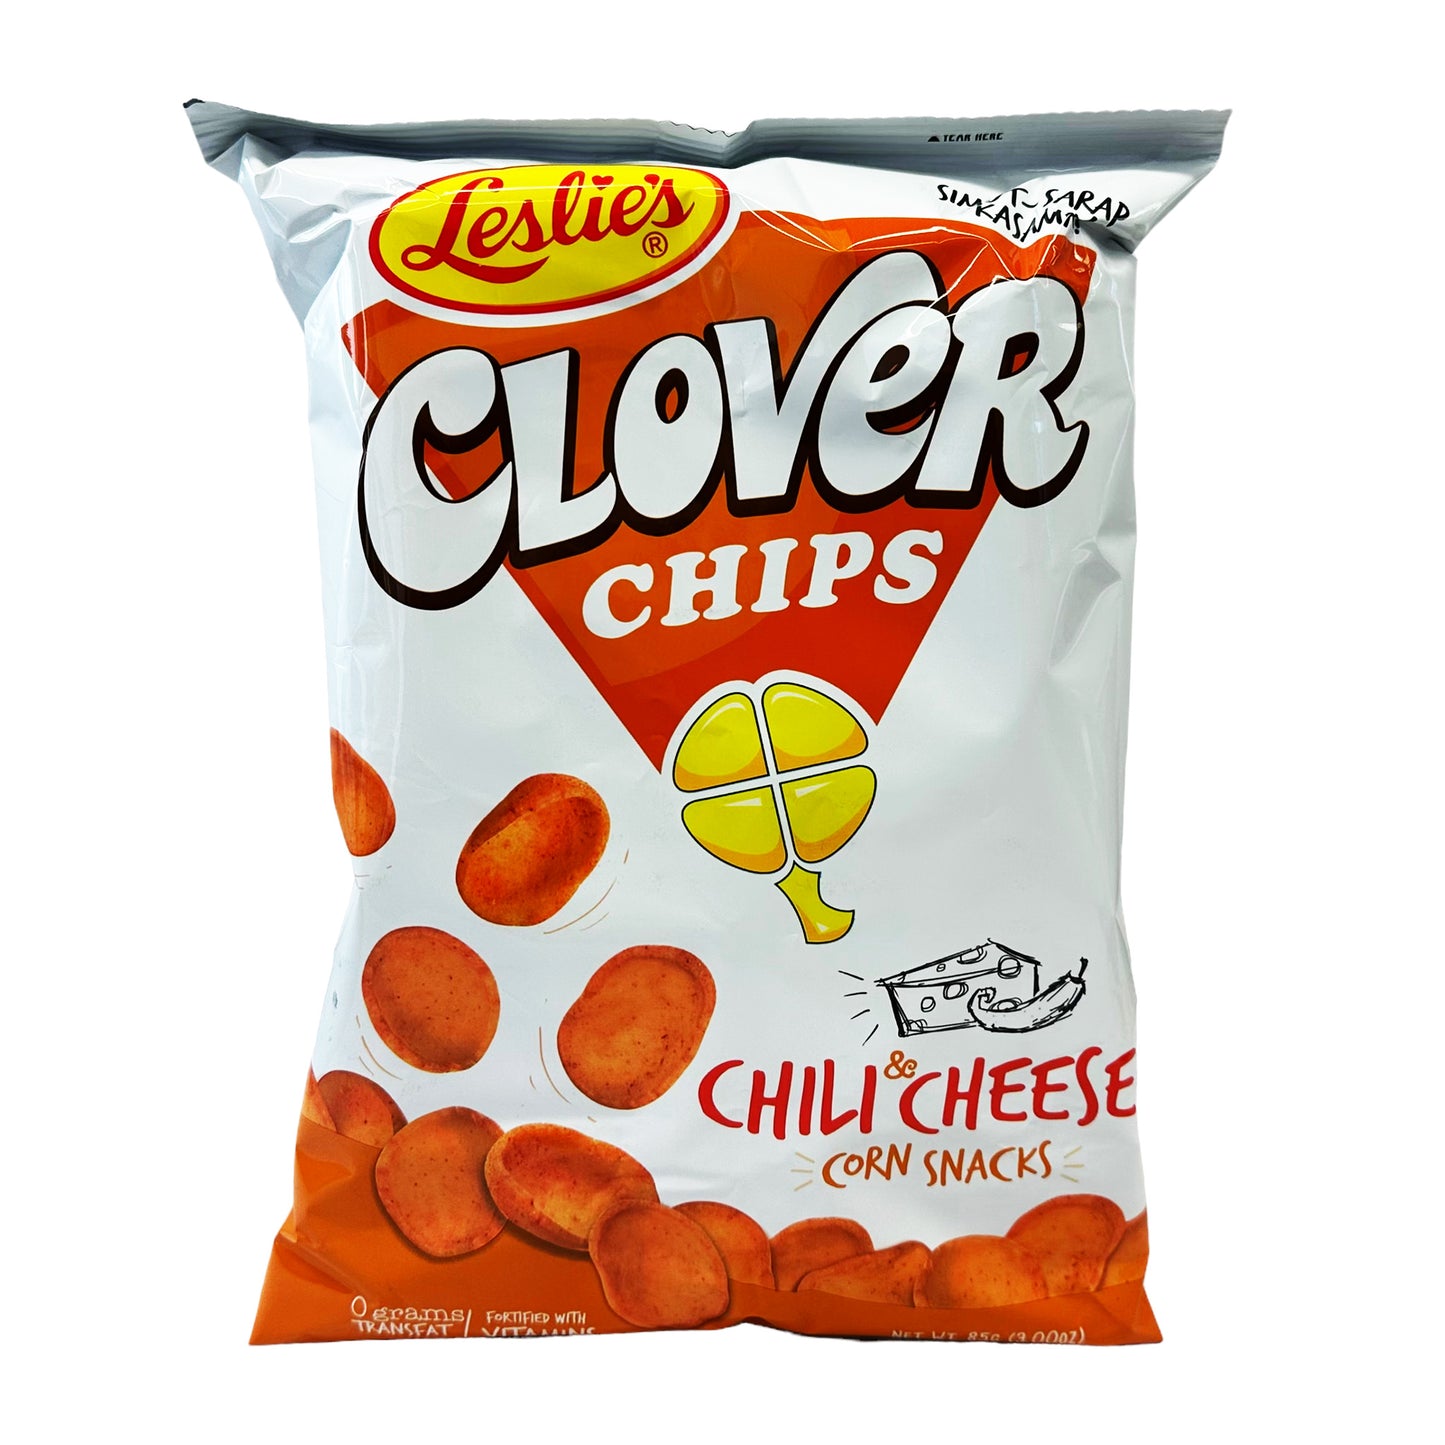 Front graphic image of Leslie's Clover Chips - Chili Cheese Flavor 3oz (85g)